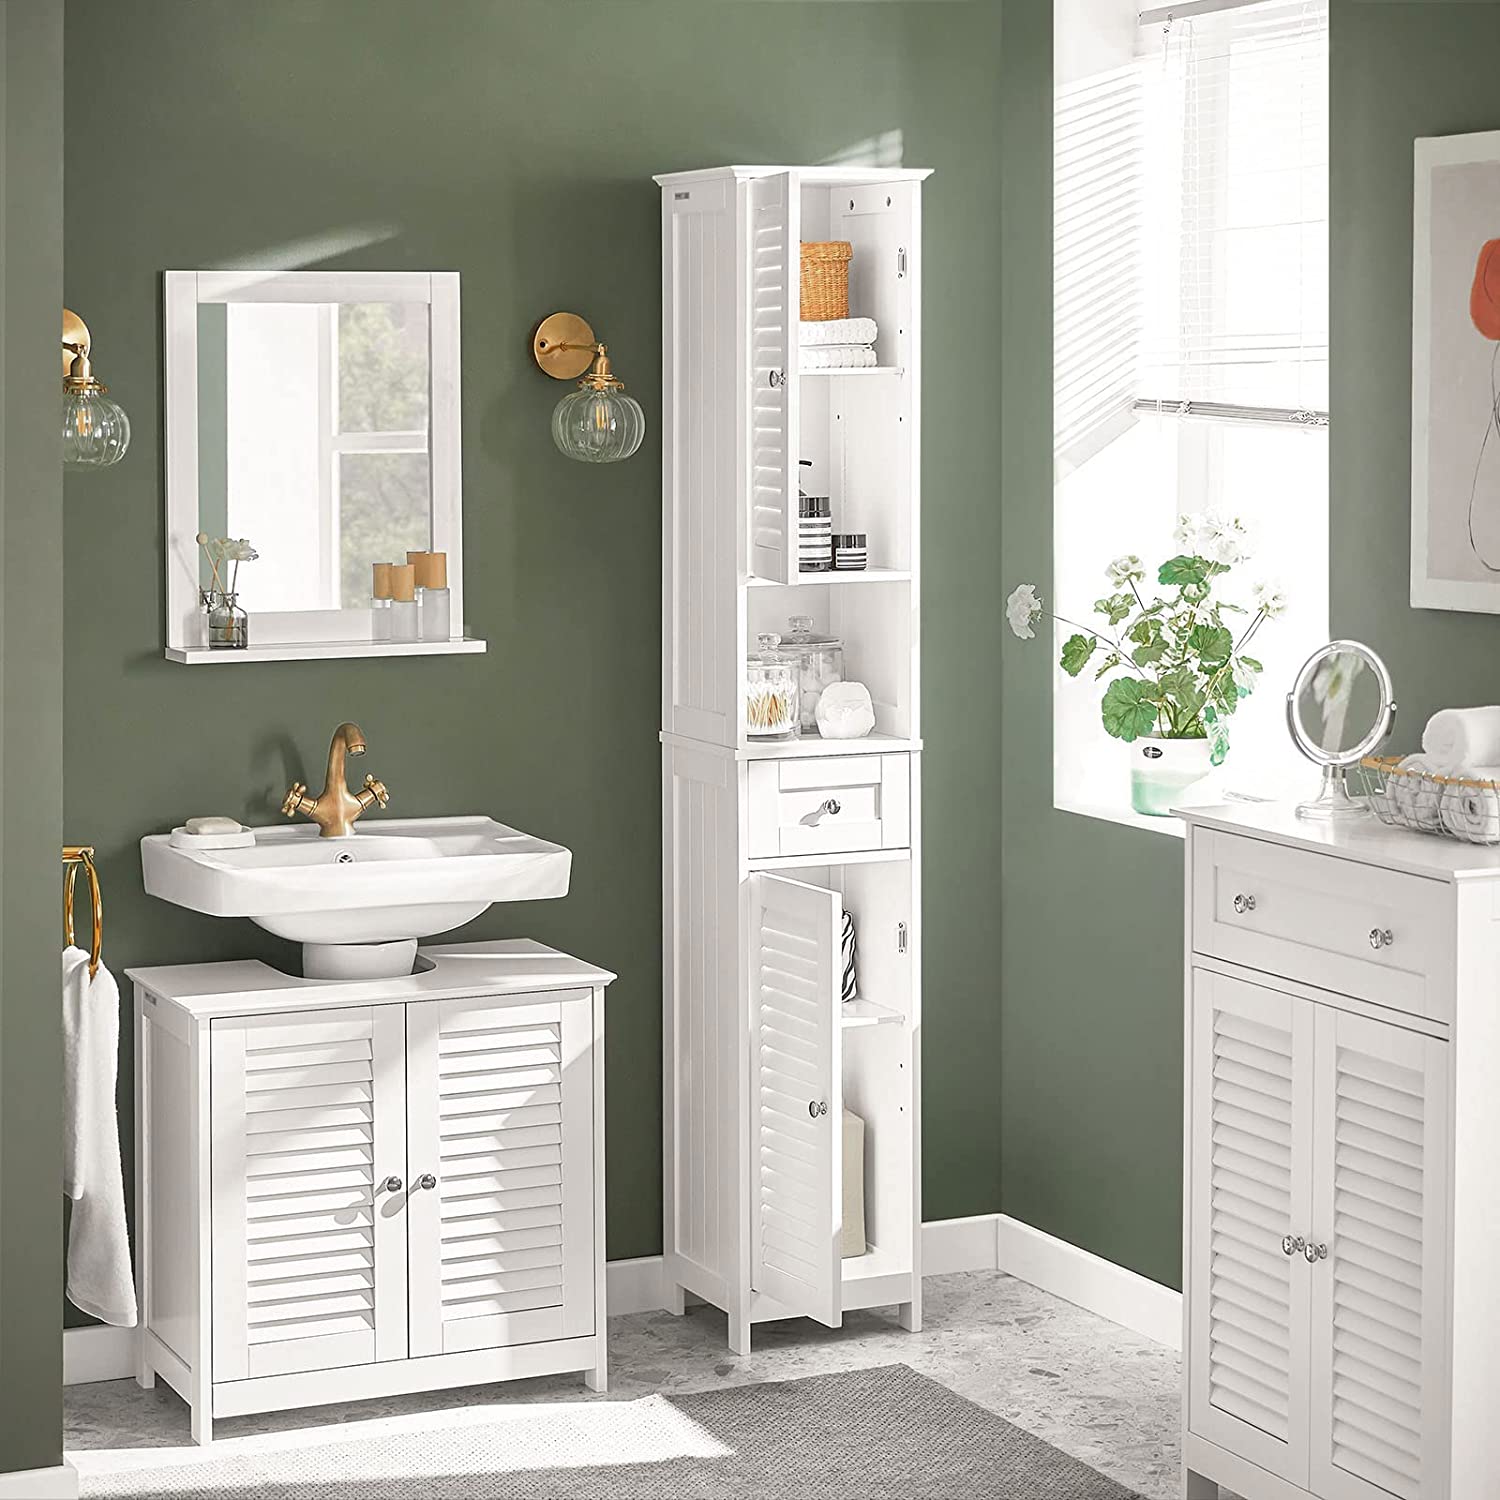 How To Organize A Bathroom Cabinet